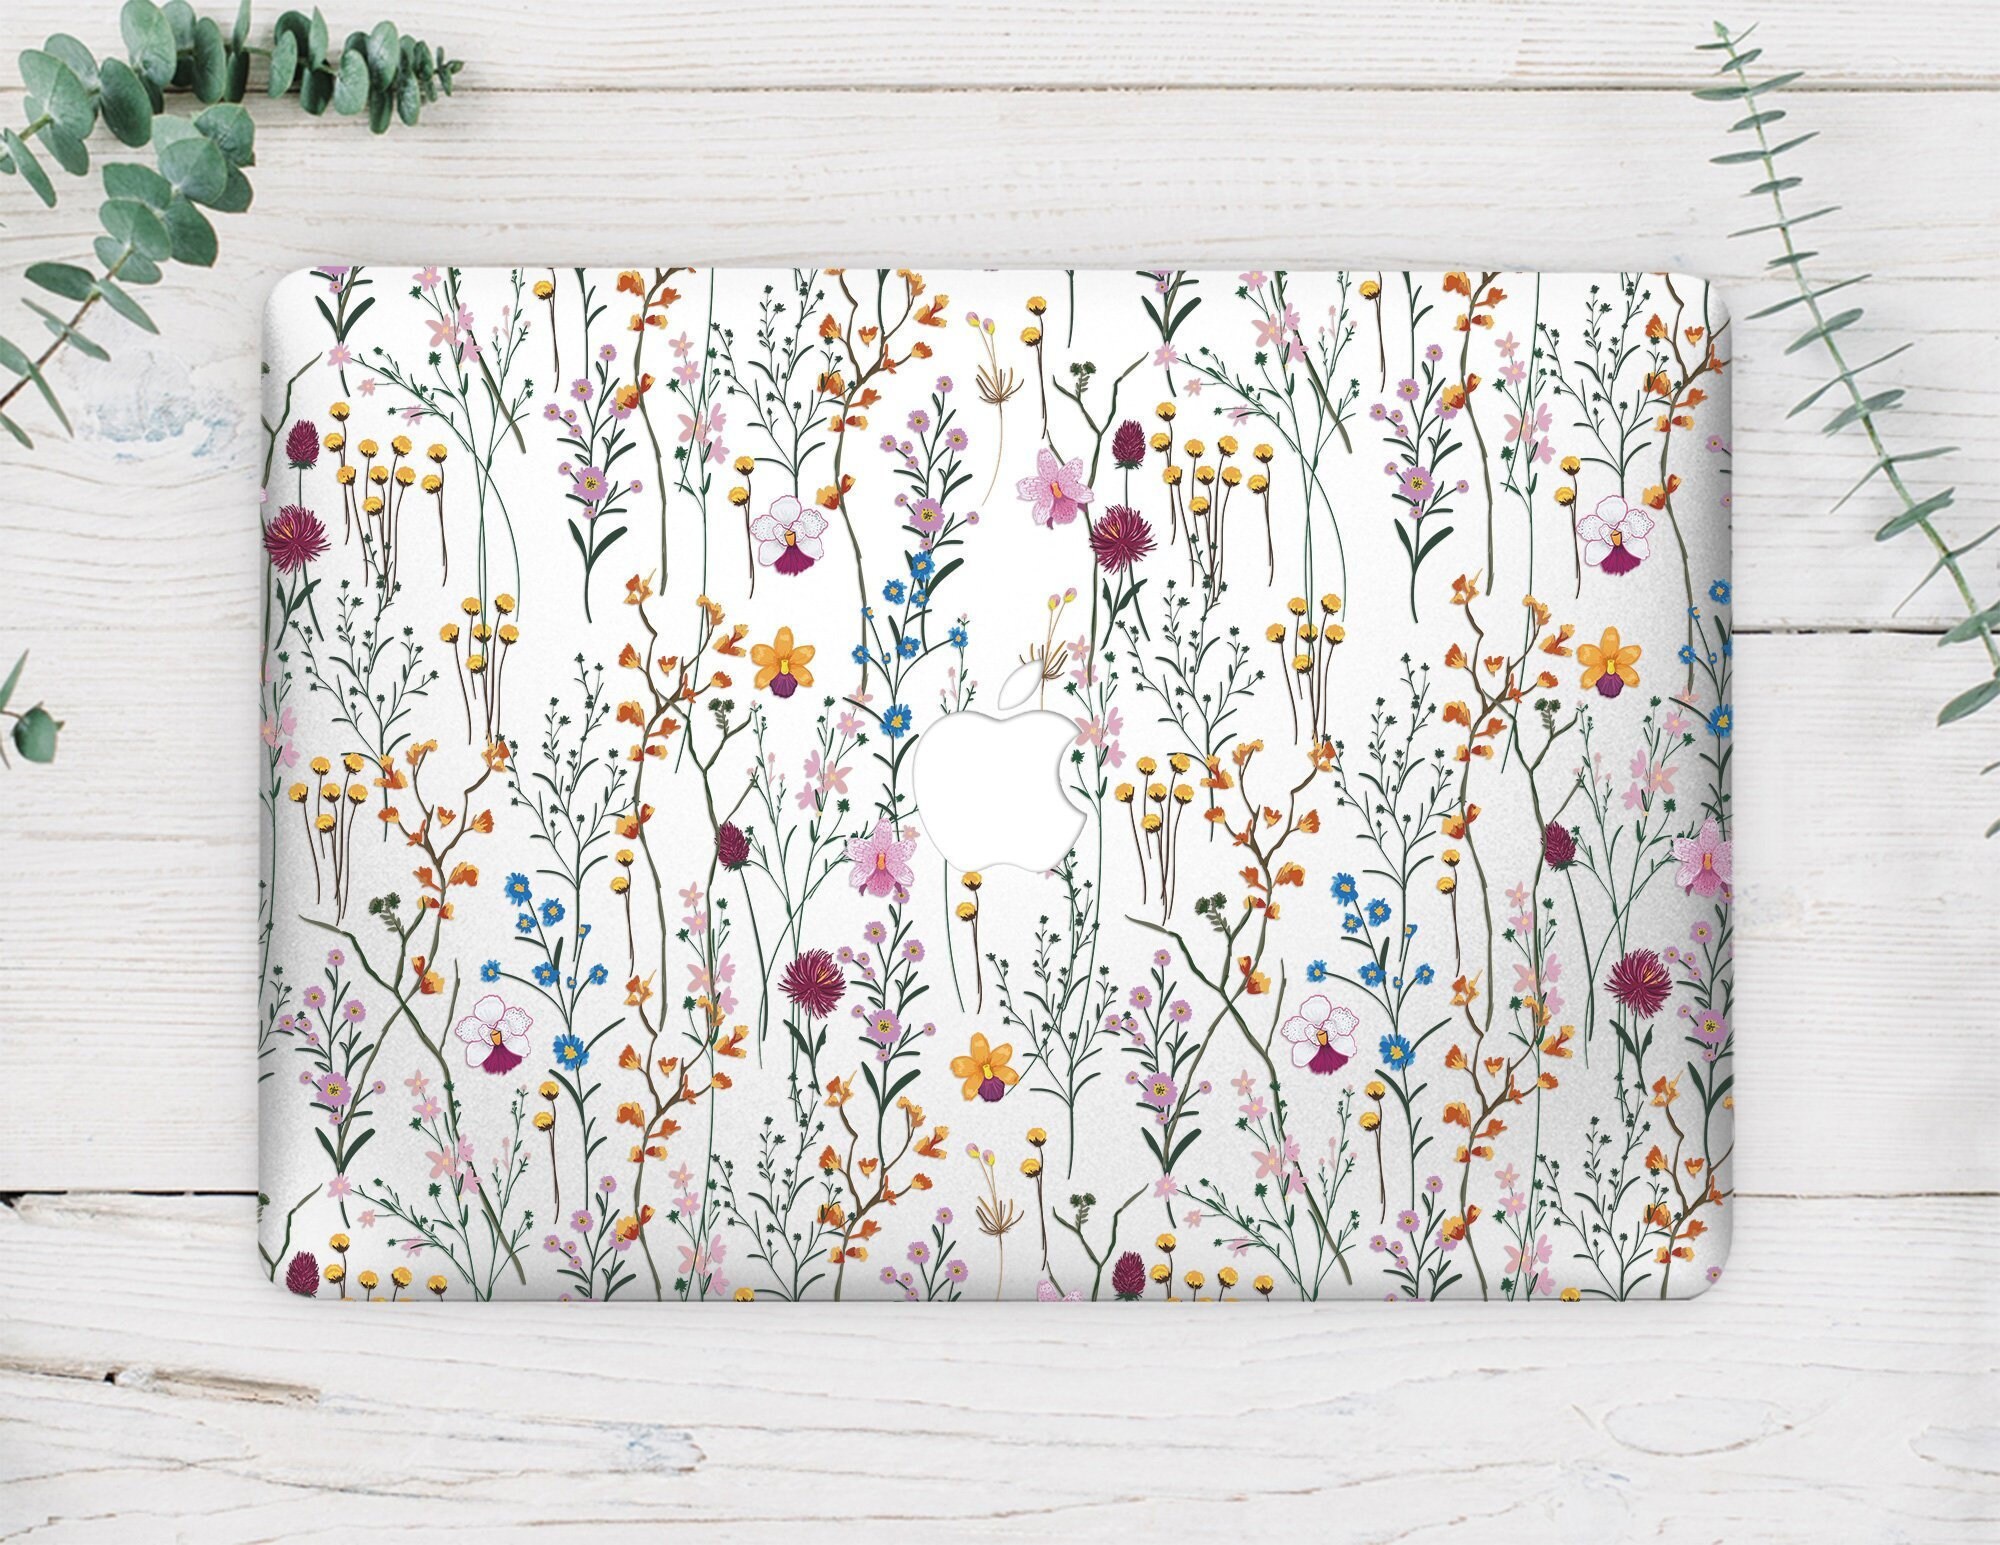 Floral Sticker MacBook 12 Inch Mac Pro 13 Decal MacBook Air 11 Skin Laptop Decal Mac Sticker MacBook Air 13 Decal Laptop 15 Inch Skin DR3076